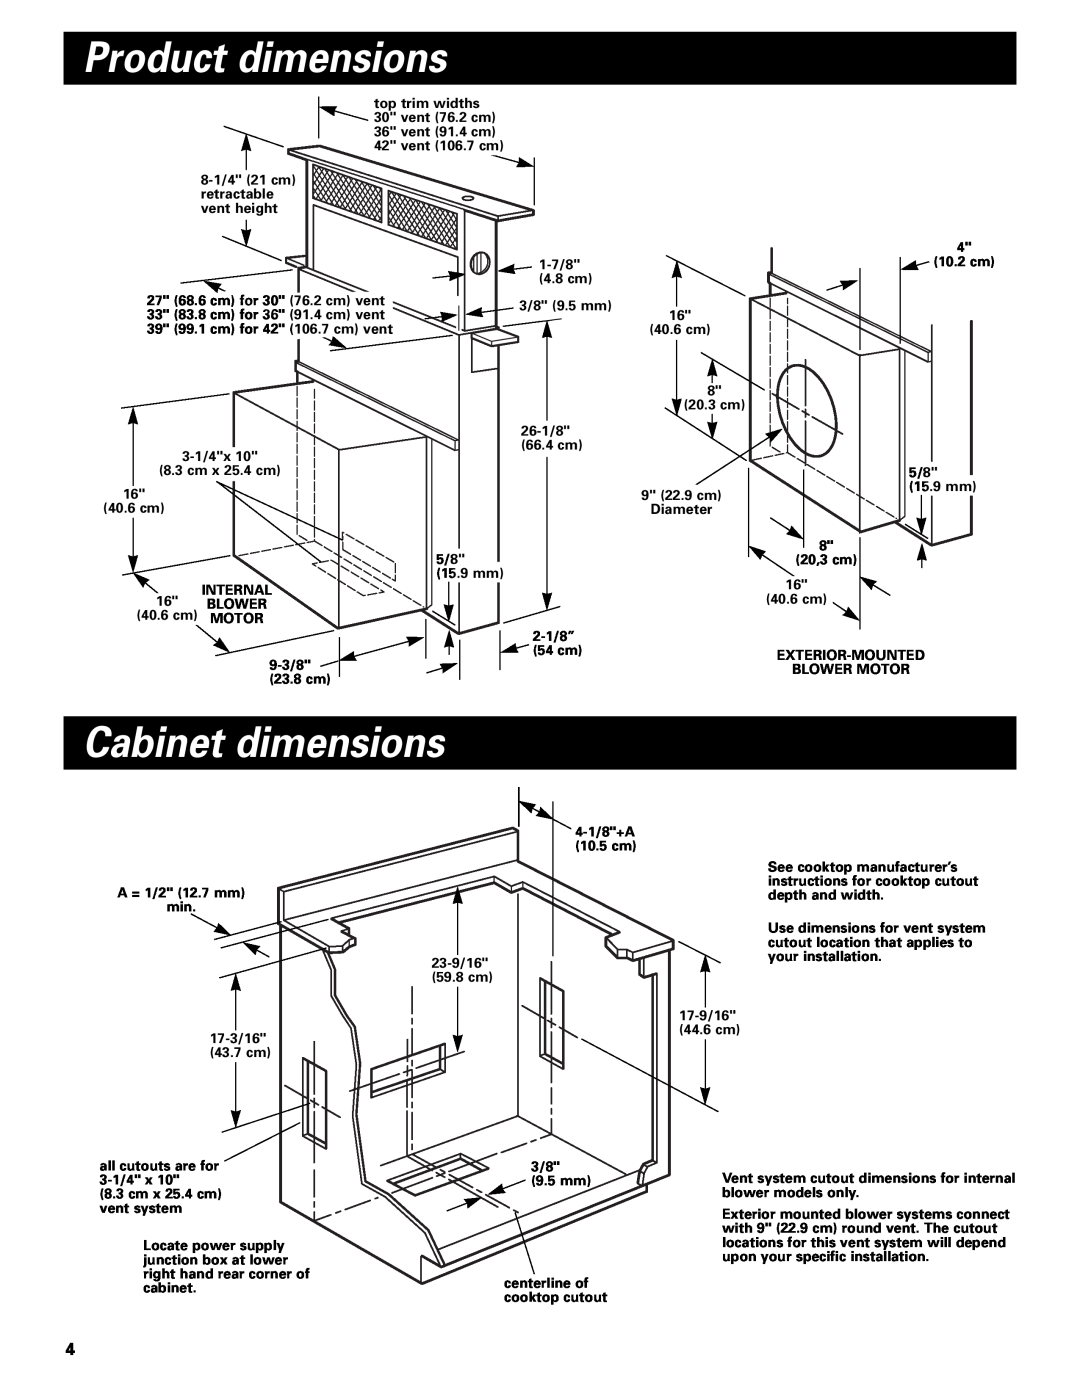 Whirlpool Vent system installation instructions Product dimensions, Cabinet dimensions 